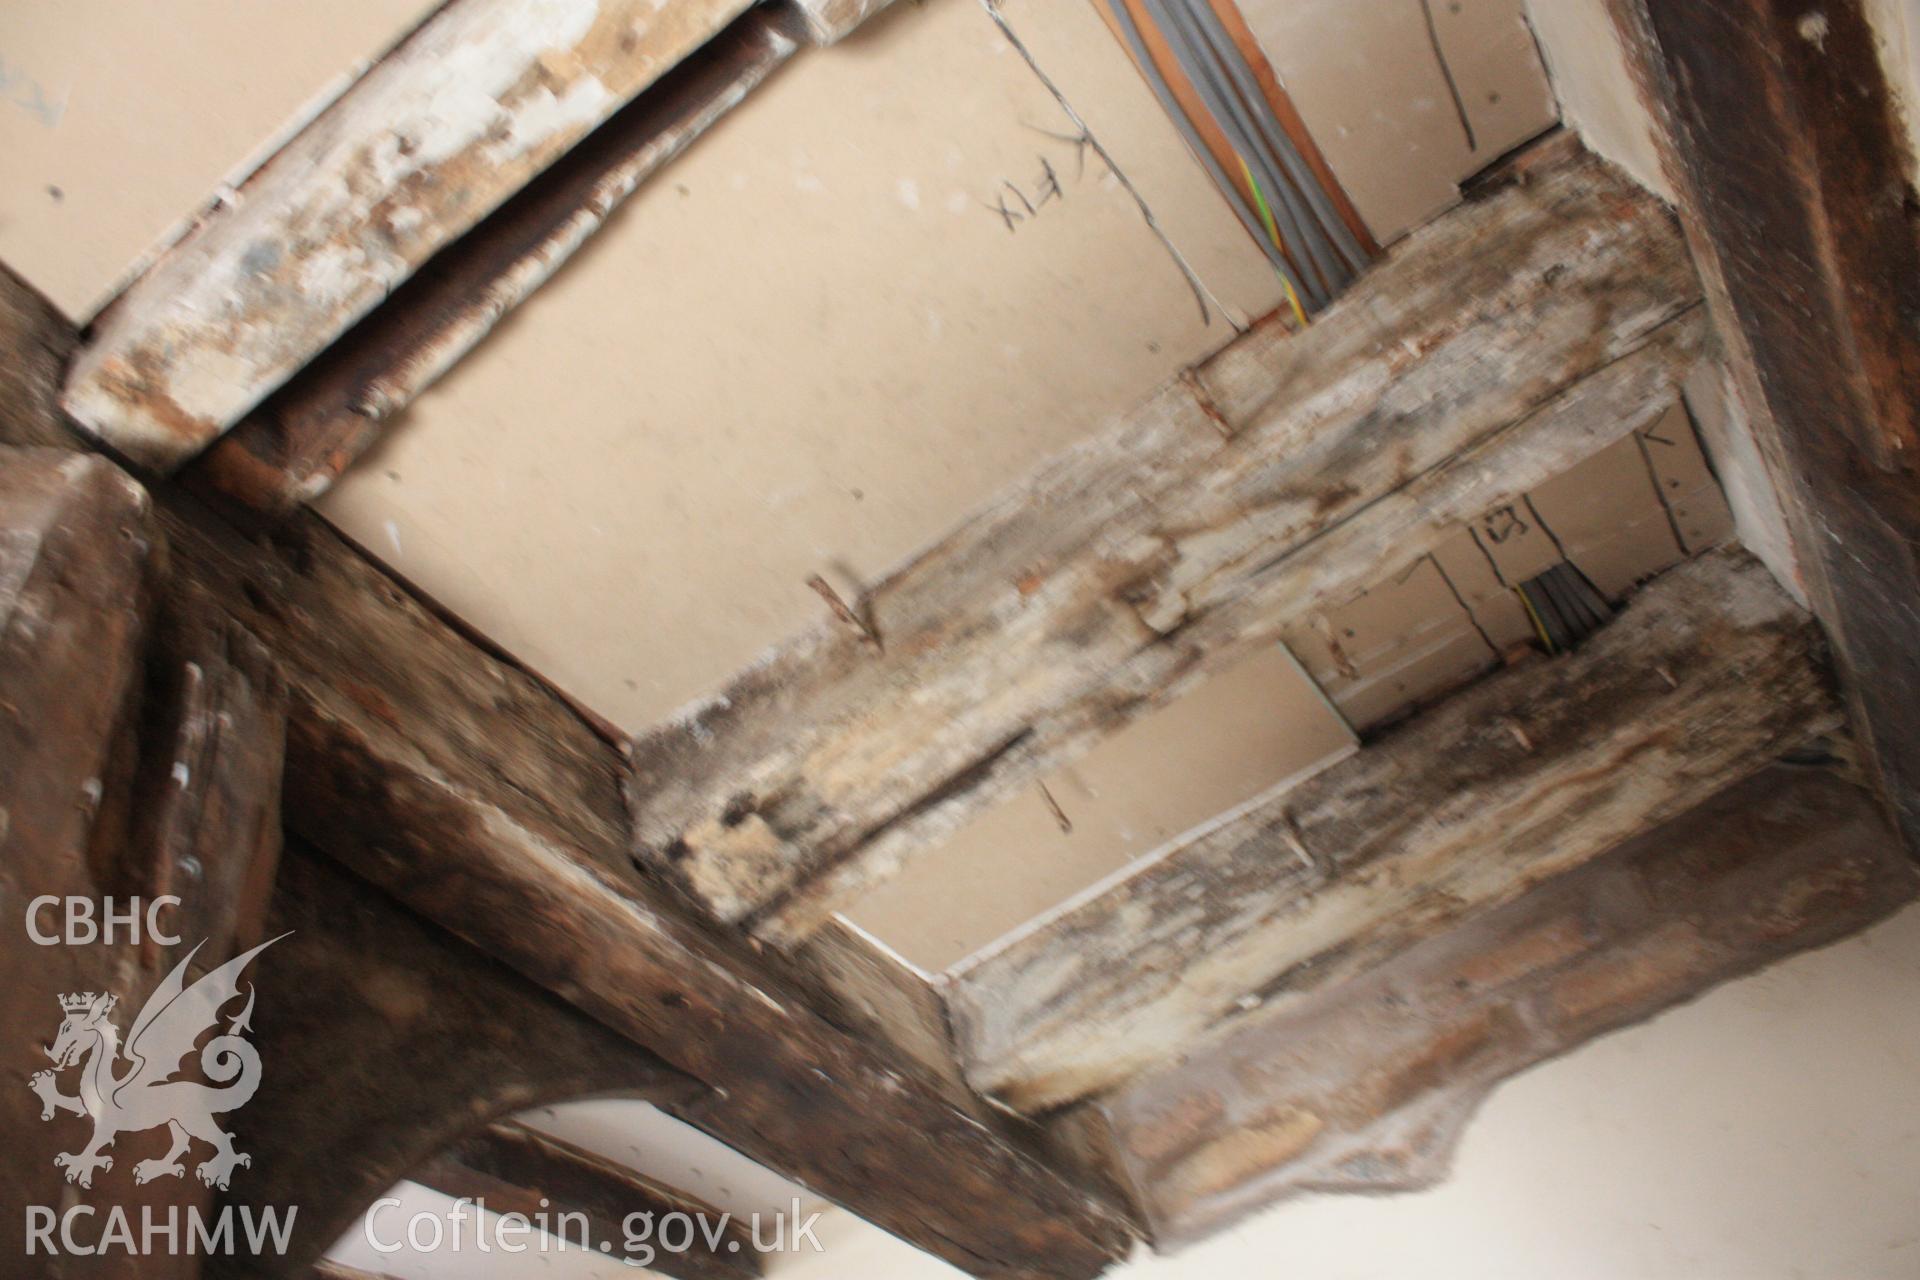 Colour photograph of internal timber frame and ceiling beams at Porth-y-Dwr, 67 Clwyd Street, Ruthin. Photographed during survey conducted by Geoff Ward on 10th June 2013.